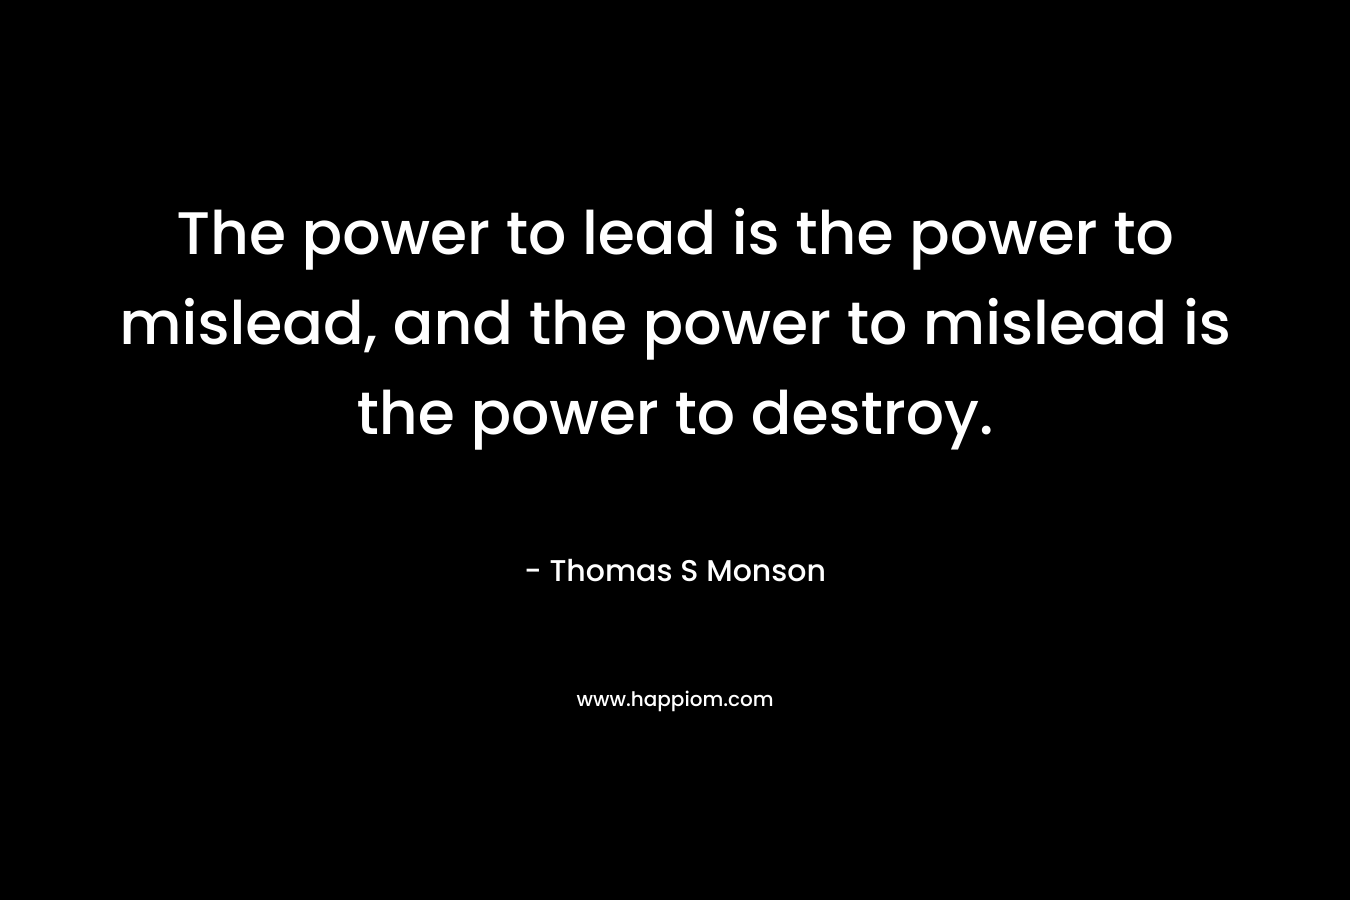 The power to lead is the power to mislead, and the power to mislead is the power to destroy.